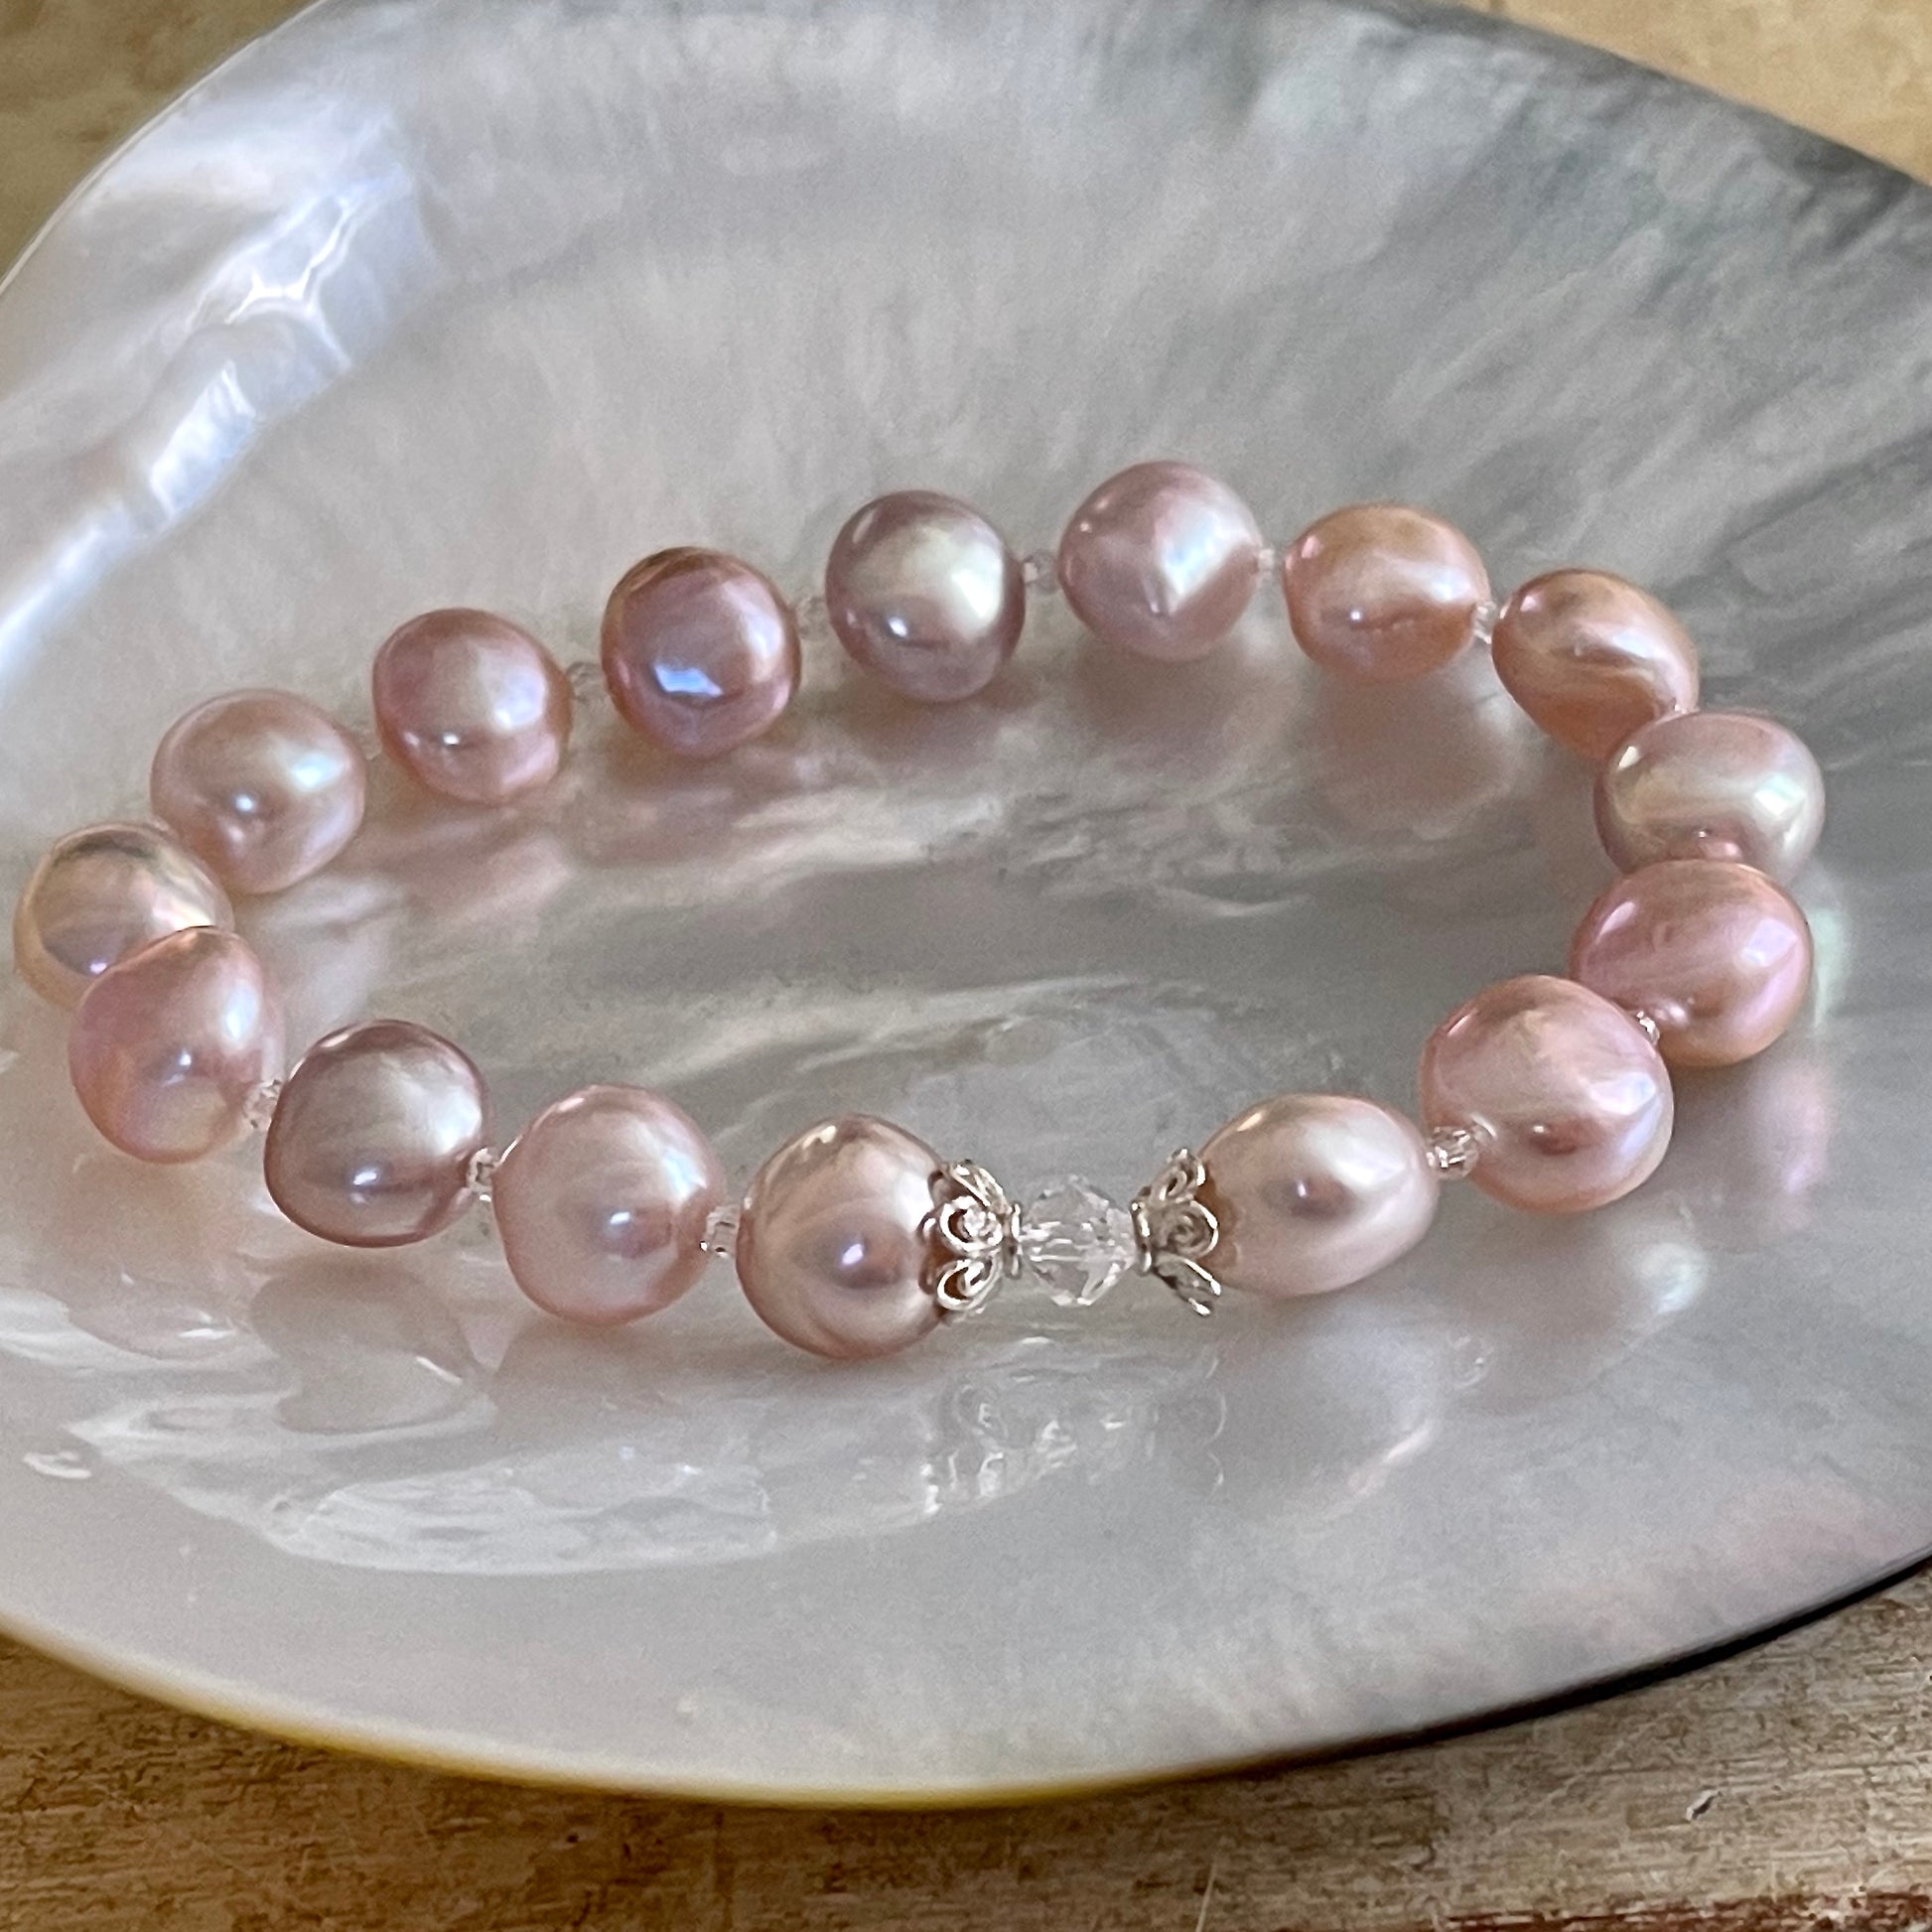 Natural color nugget pearl stretch bracelet - interior near window overcast day